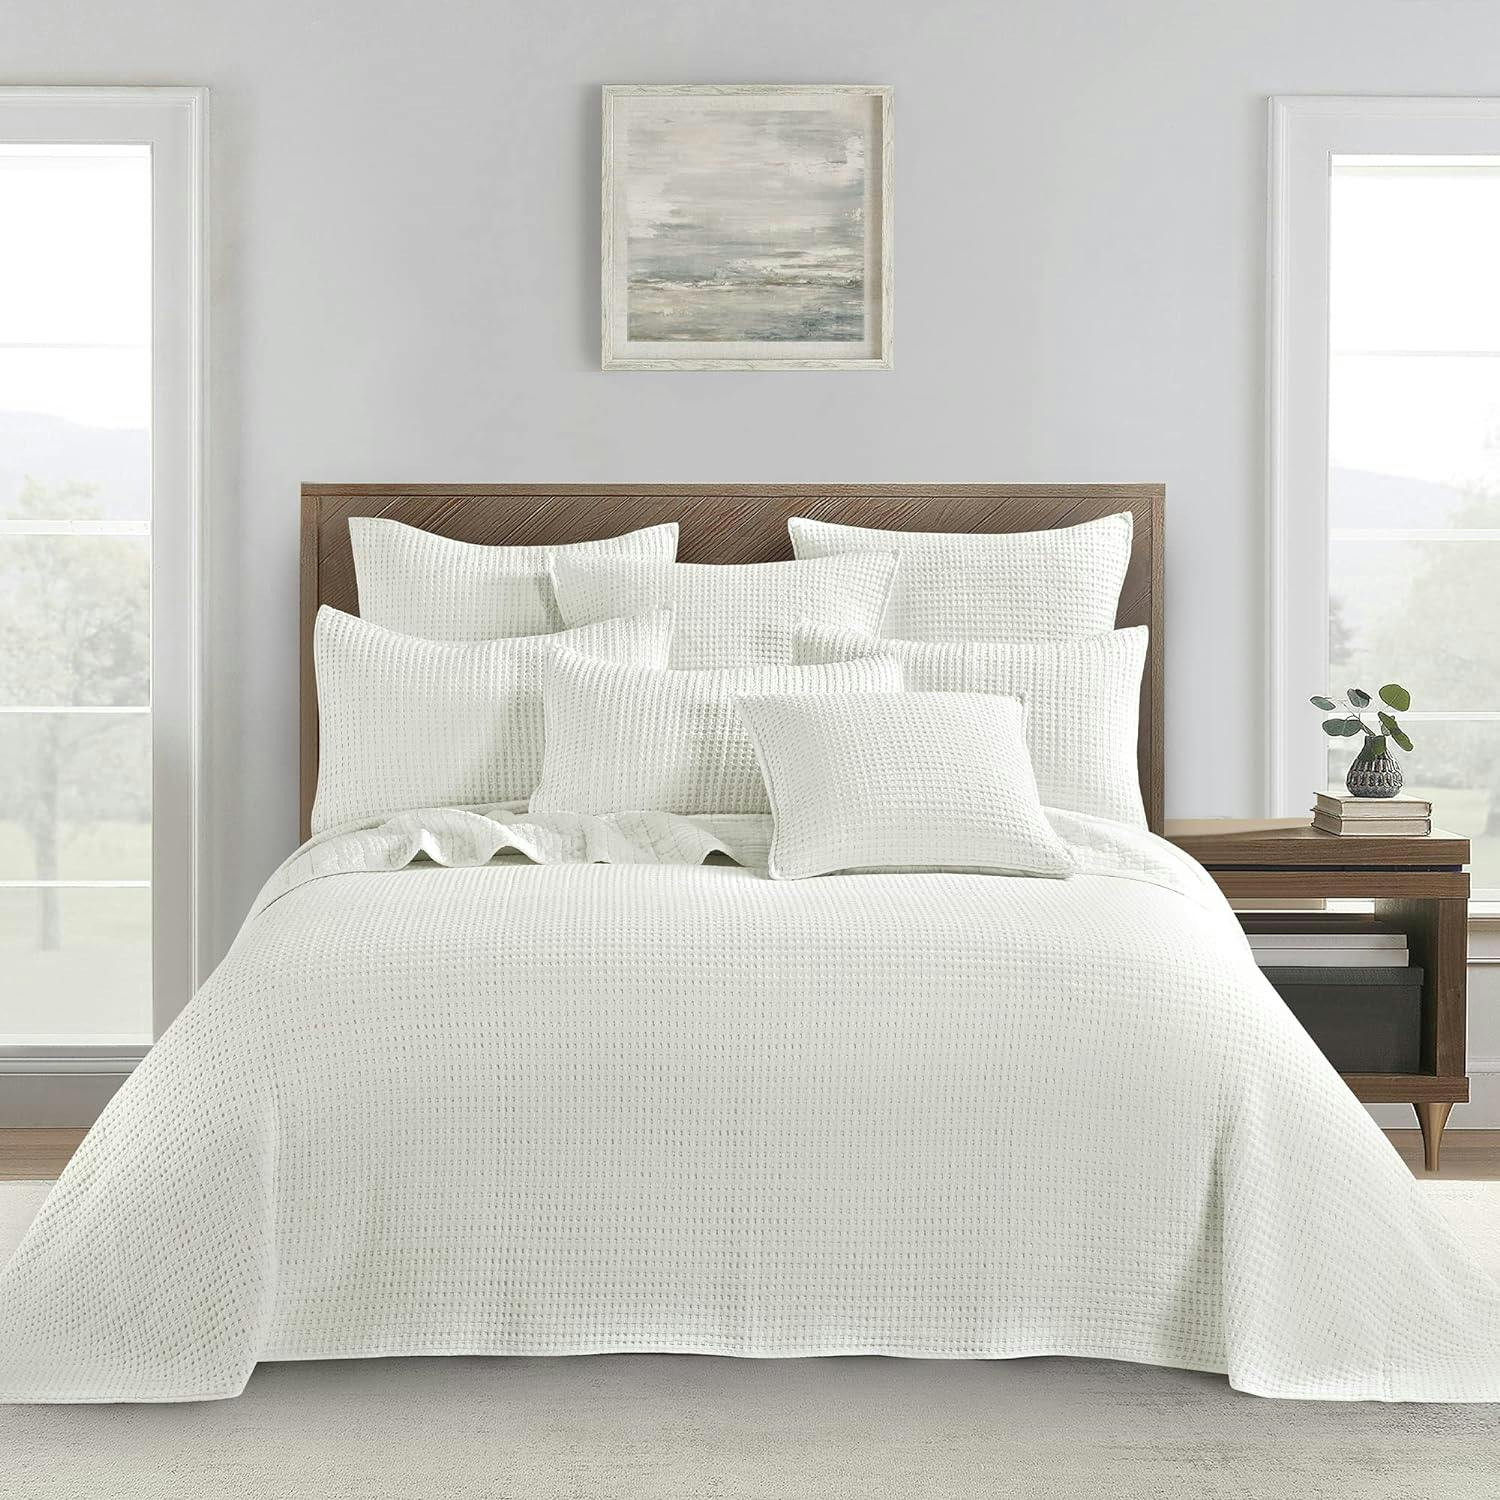 Luxurious Cream Cotton Waffle Full Bedspread Set with Reversible Microfiber